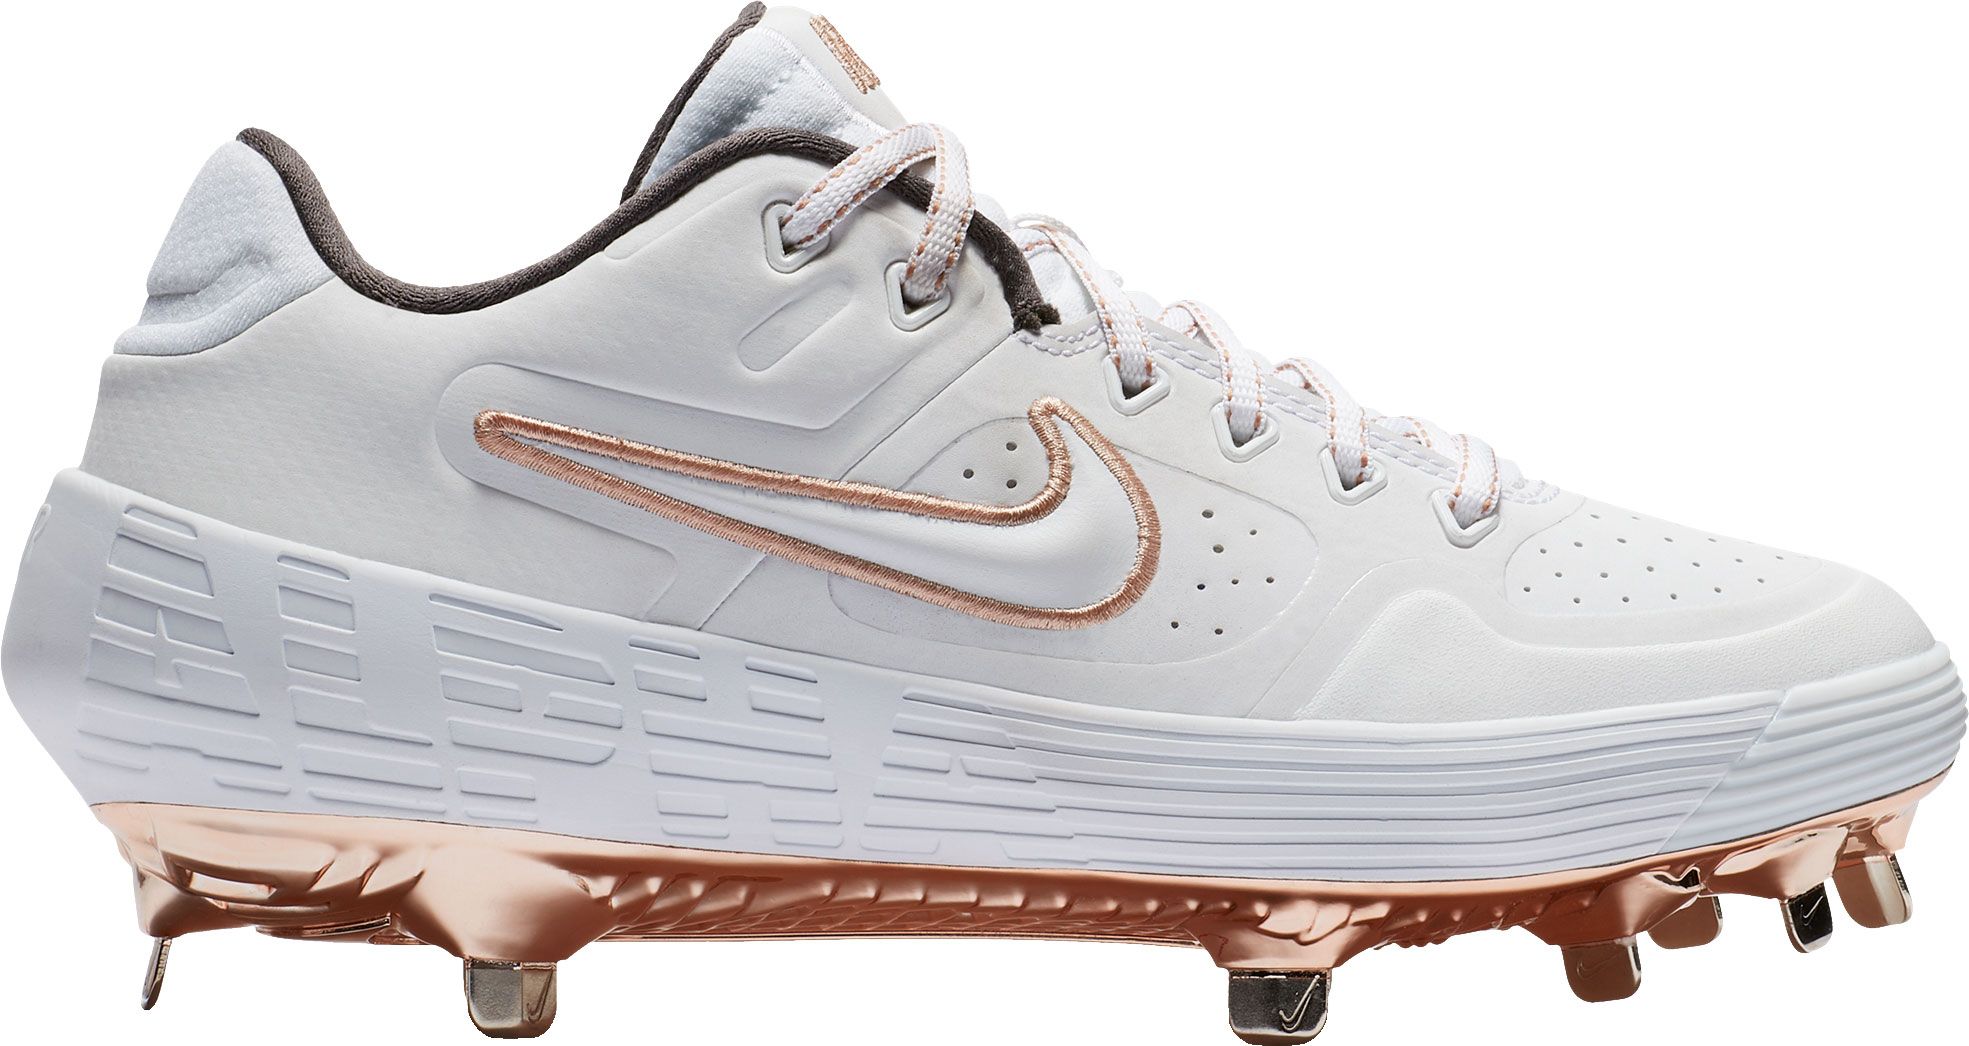 white and gold nike softball cleats